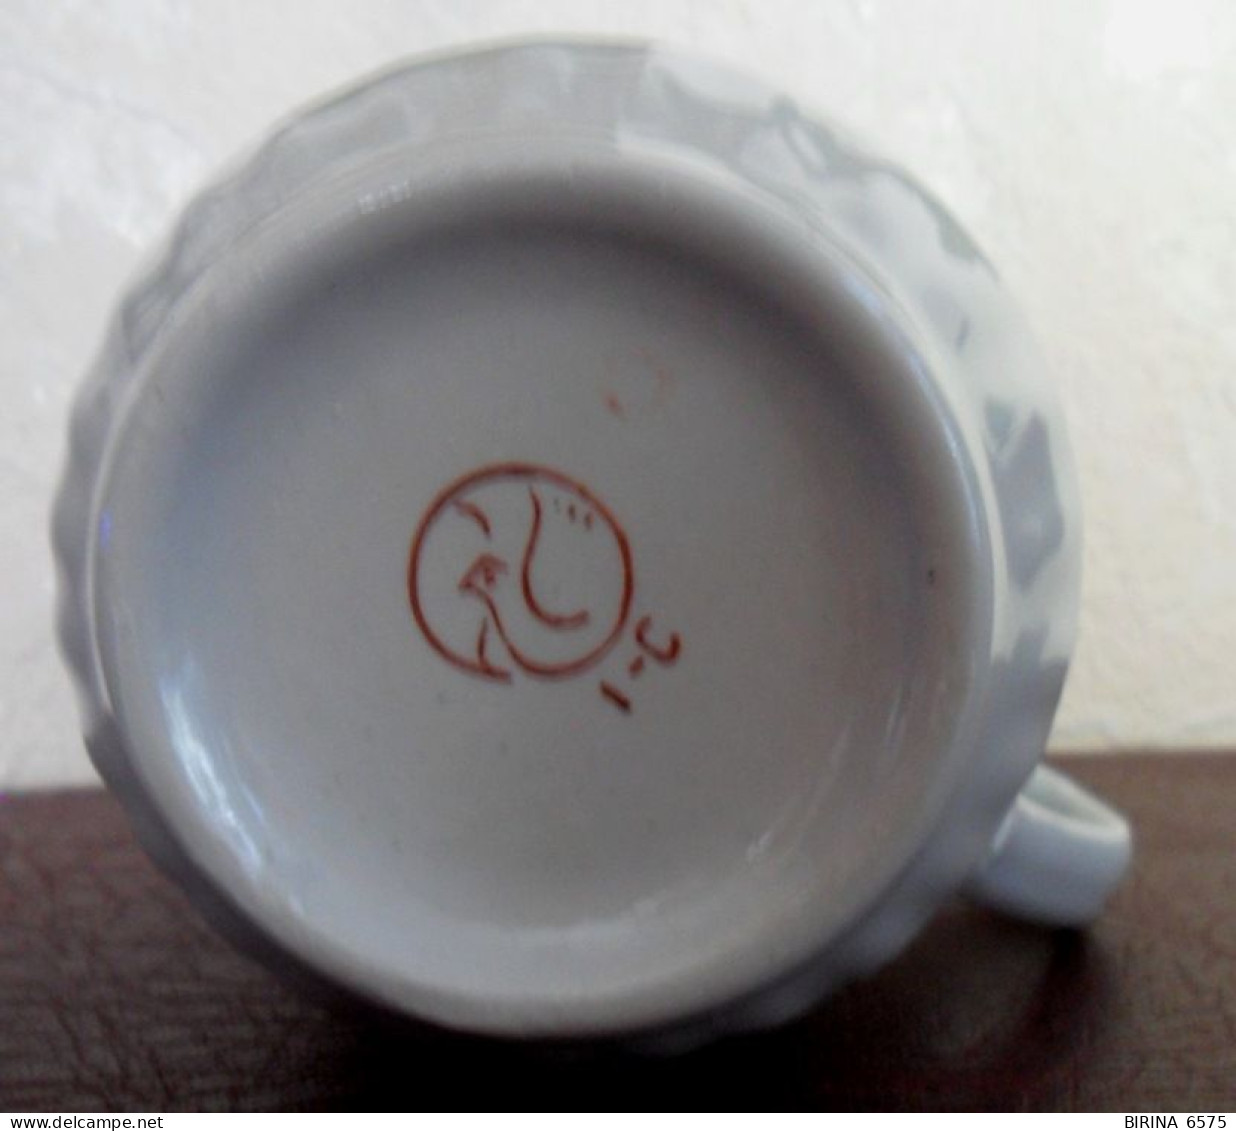 A Cup. Cup. Flowers. TERNOPIL PORCELAIN FACTORY. USSR. - 8-19-i - Tasses